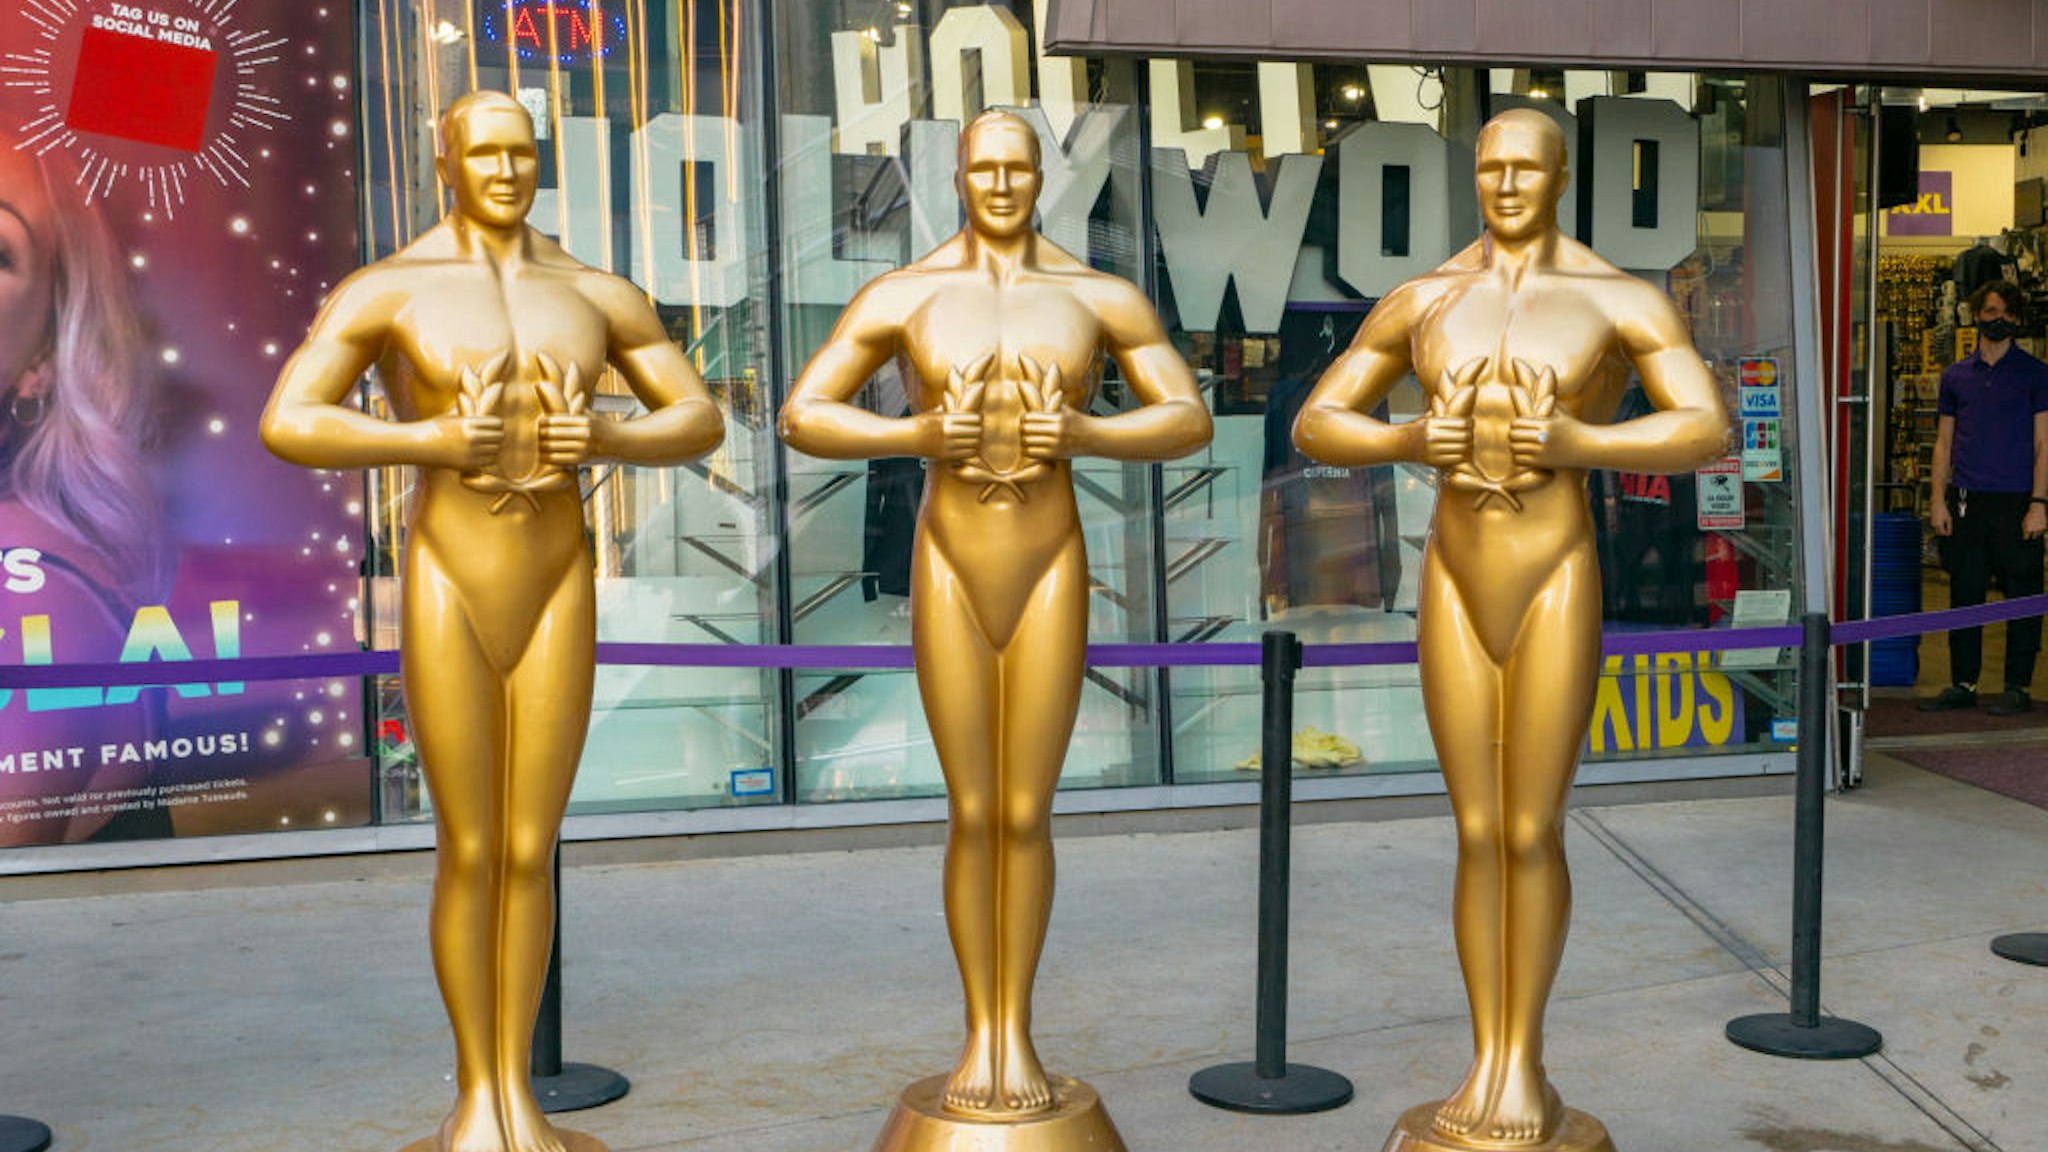 HOLLYWOOD, CA - APRIL 19: General view of Oscar-like statues on Hollywood Blvd near the Dolby Theatre at Hollywood &amp; Highland on April 19, 2021 in Hollywood, California.